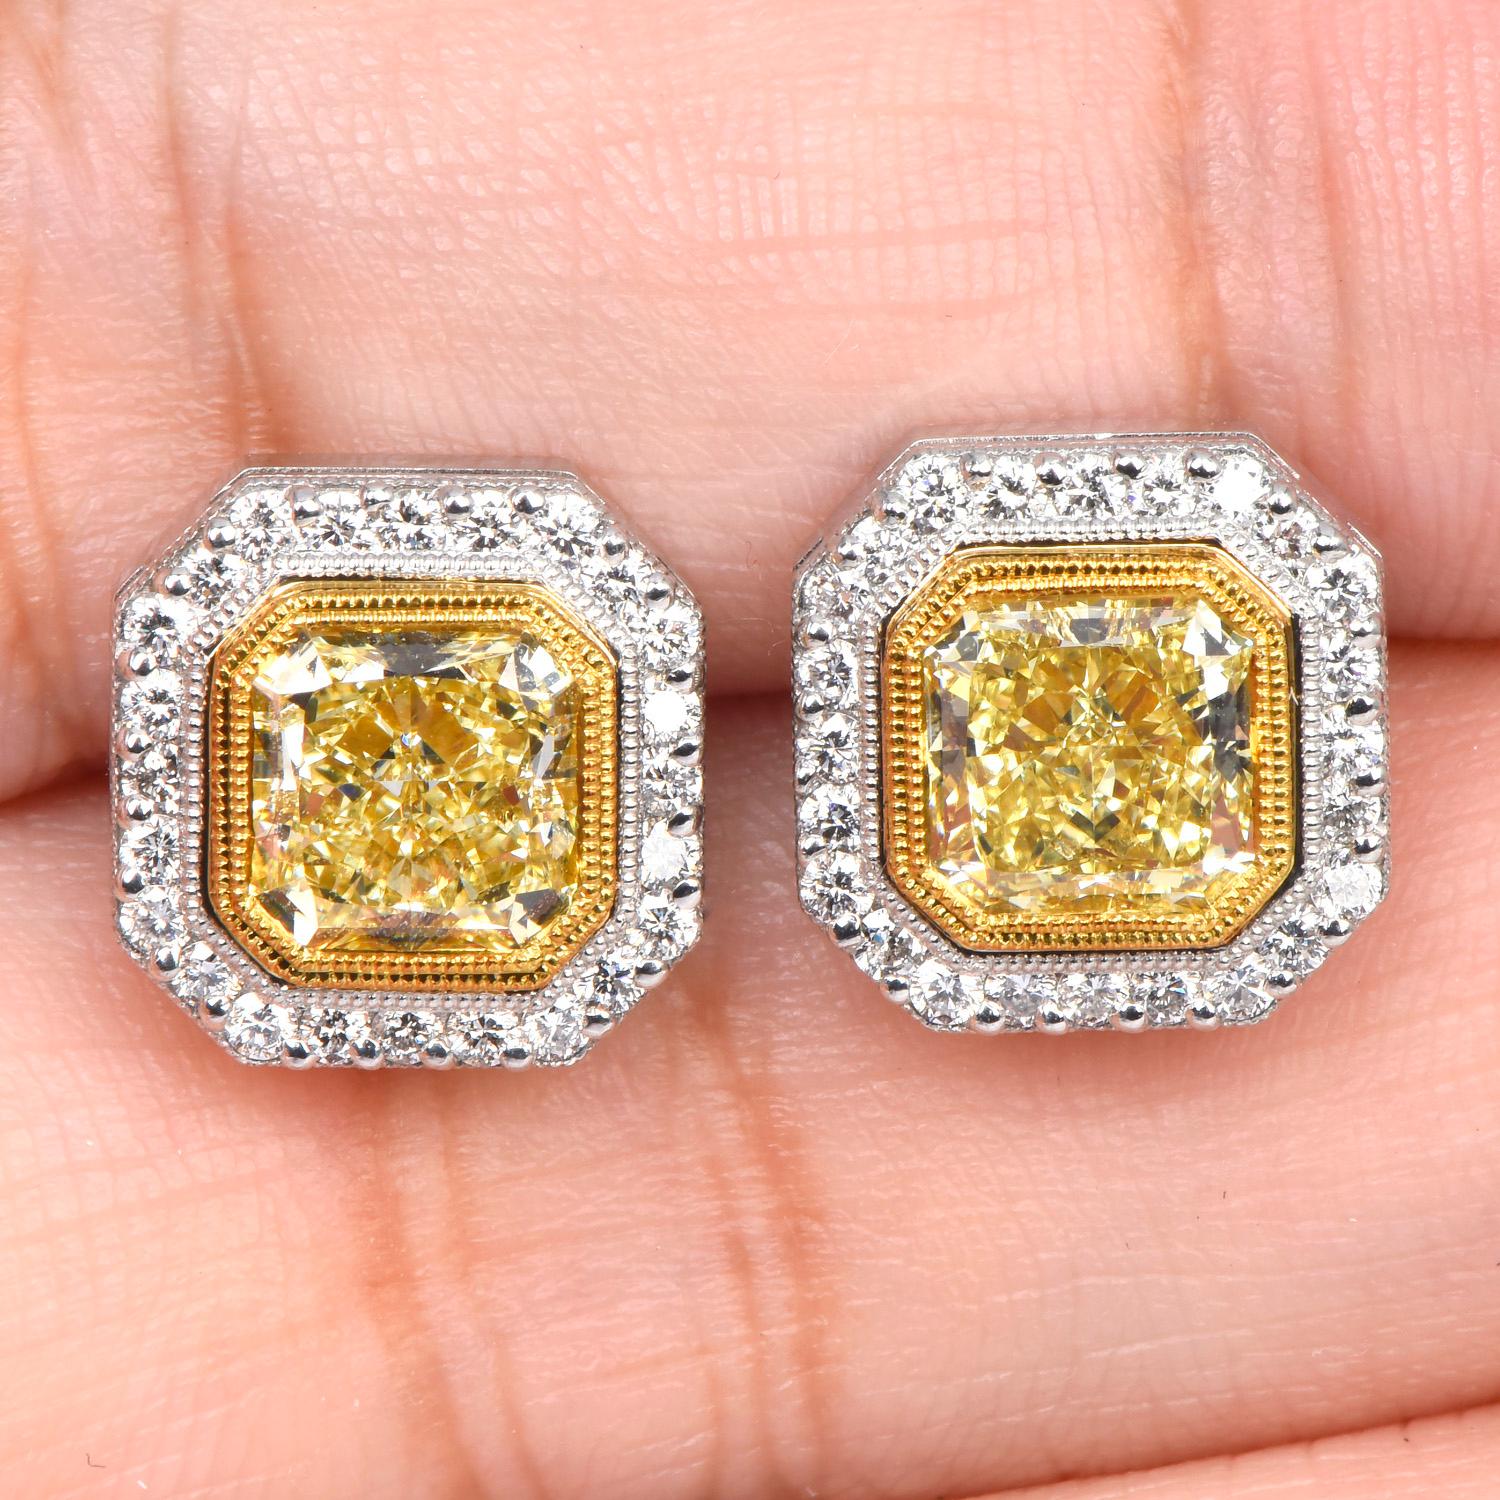 Modern Cushion 3.65cts Fancy Yellow Diamond Platinum Gold Halo Stud Earrings In New Condition For Sale In Miami, FL